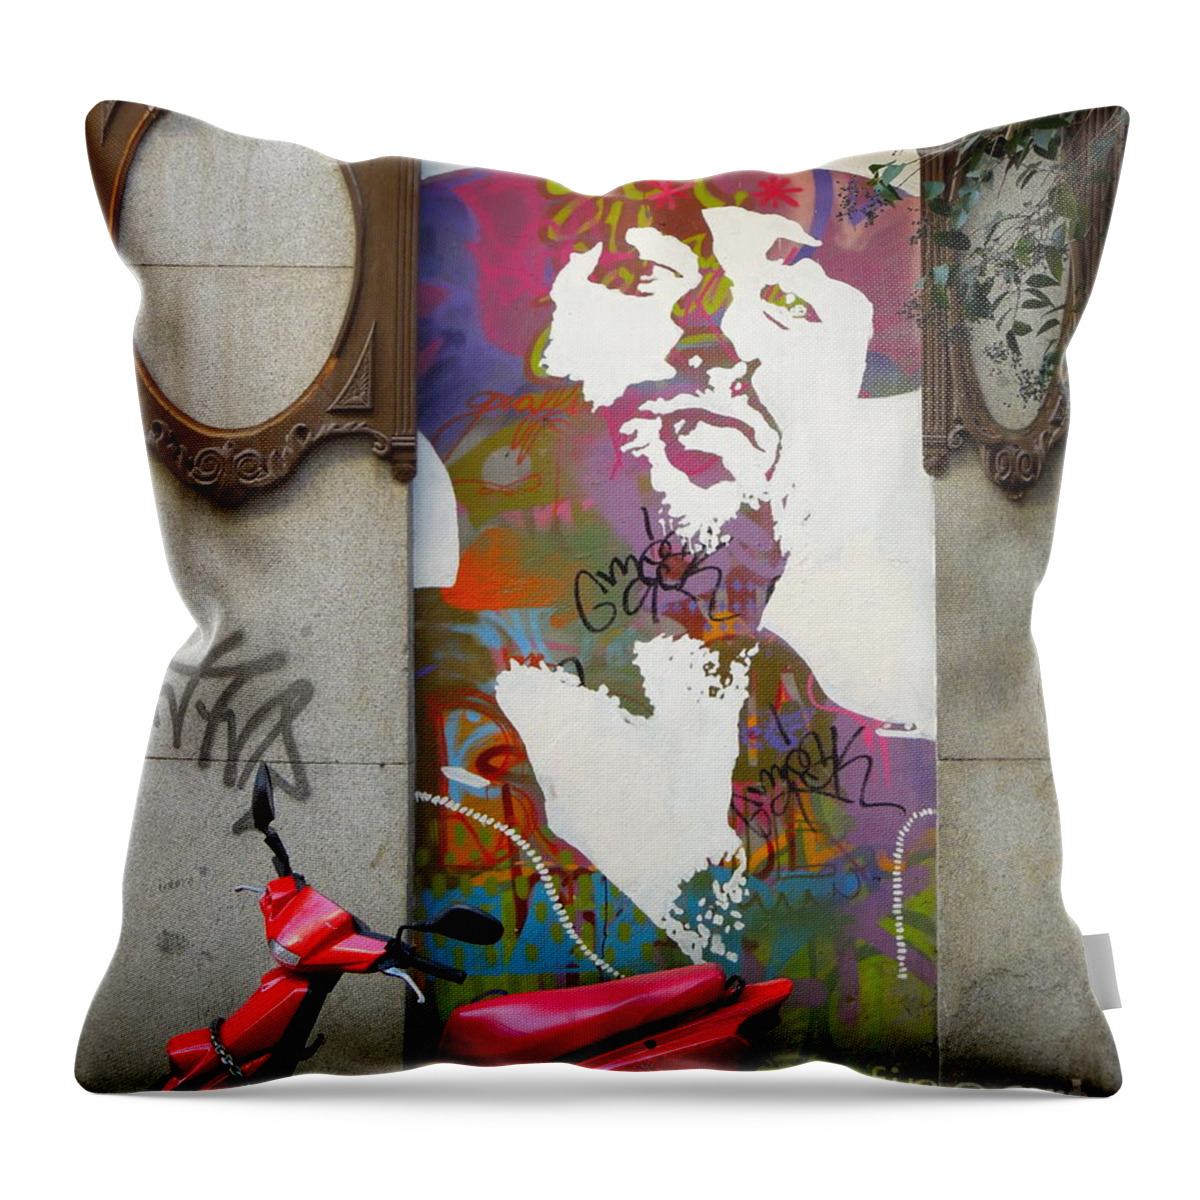 Graffiti Throw Pillow featuring the photograph Artistic Words by KD Johnson